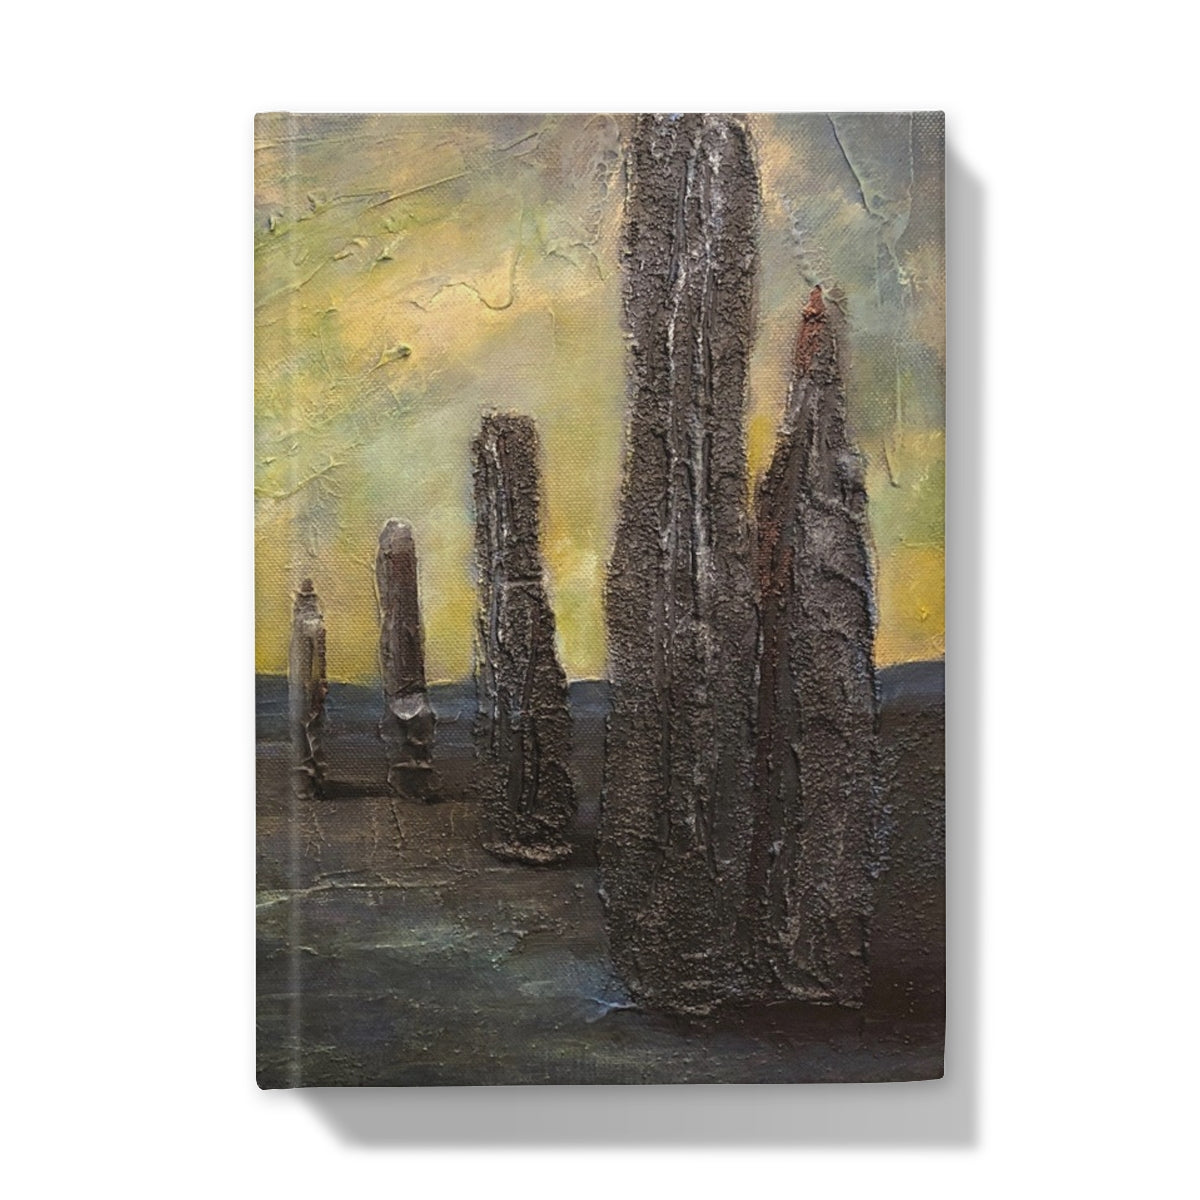 An Ethereal Ring Of Brodgar Art Gifts Hardback Journal-Journals & Notebooks-Orkney Art Gallery-A5-Plain-Paintings, Prints, Homeware, Art Gifts From Scotland By Scottish Artist Kevin Hunter